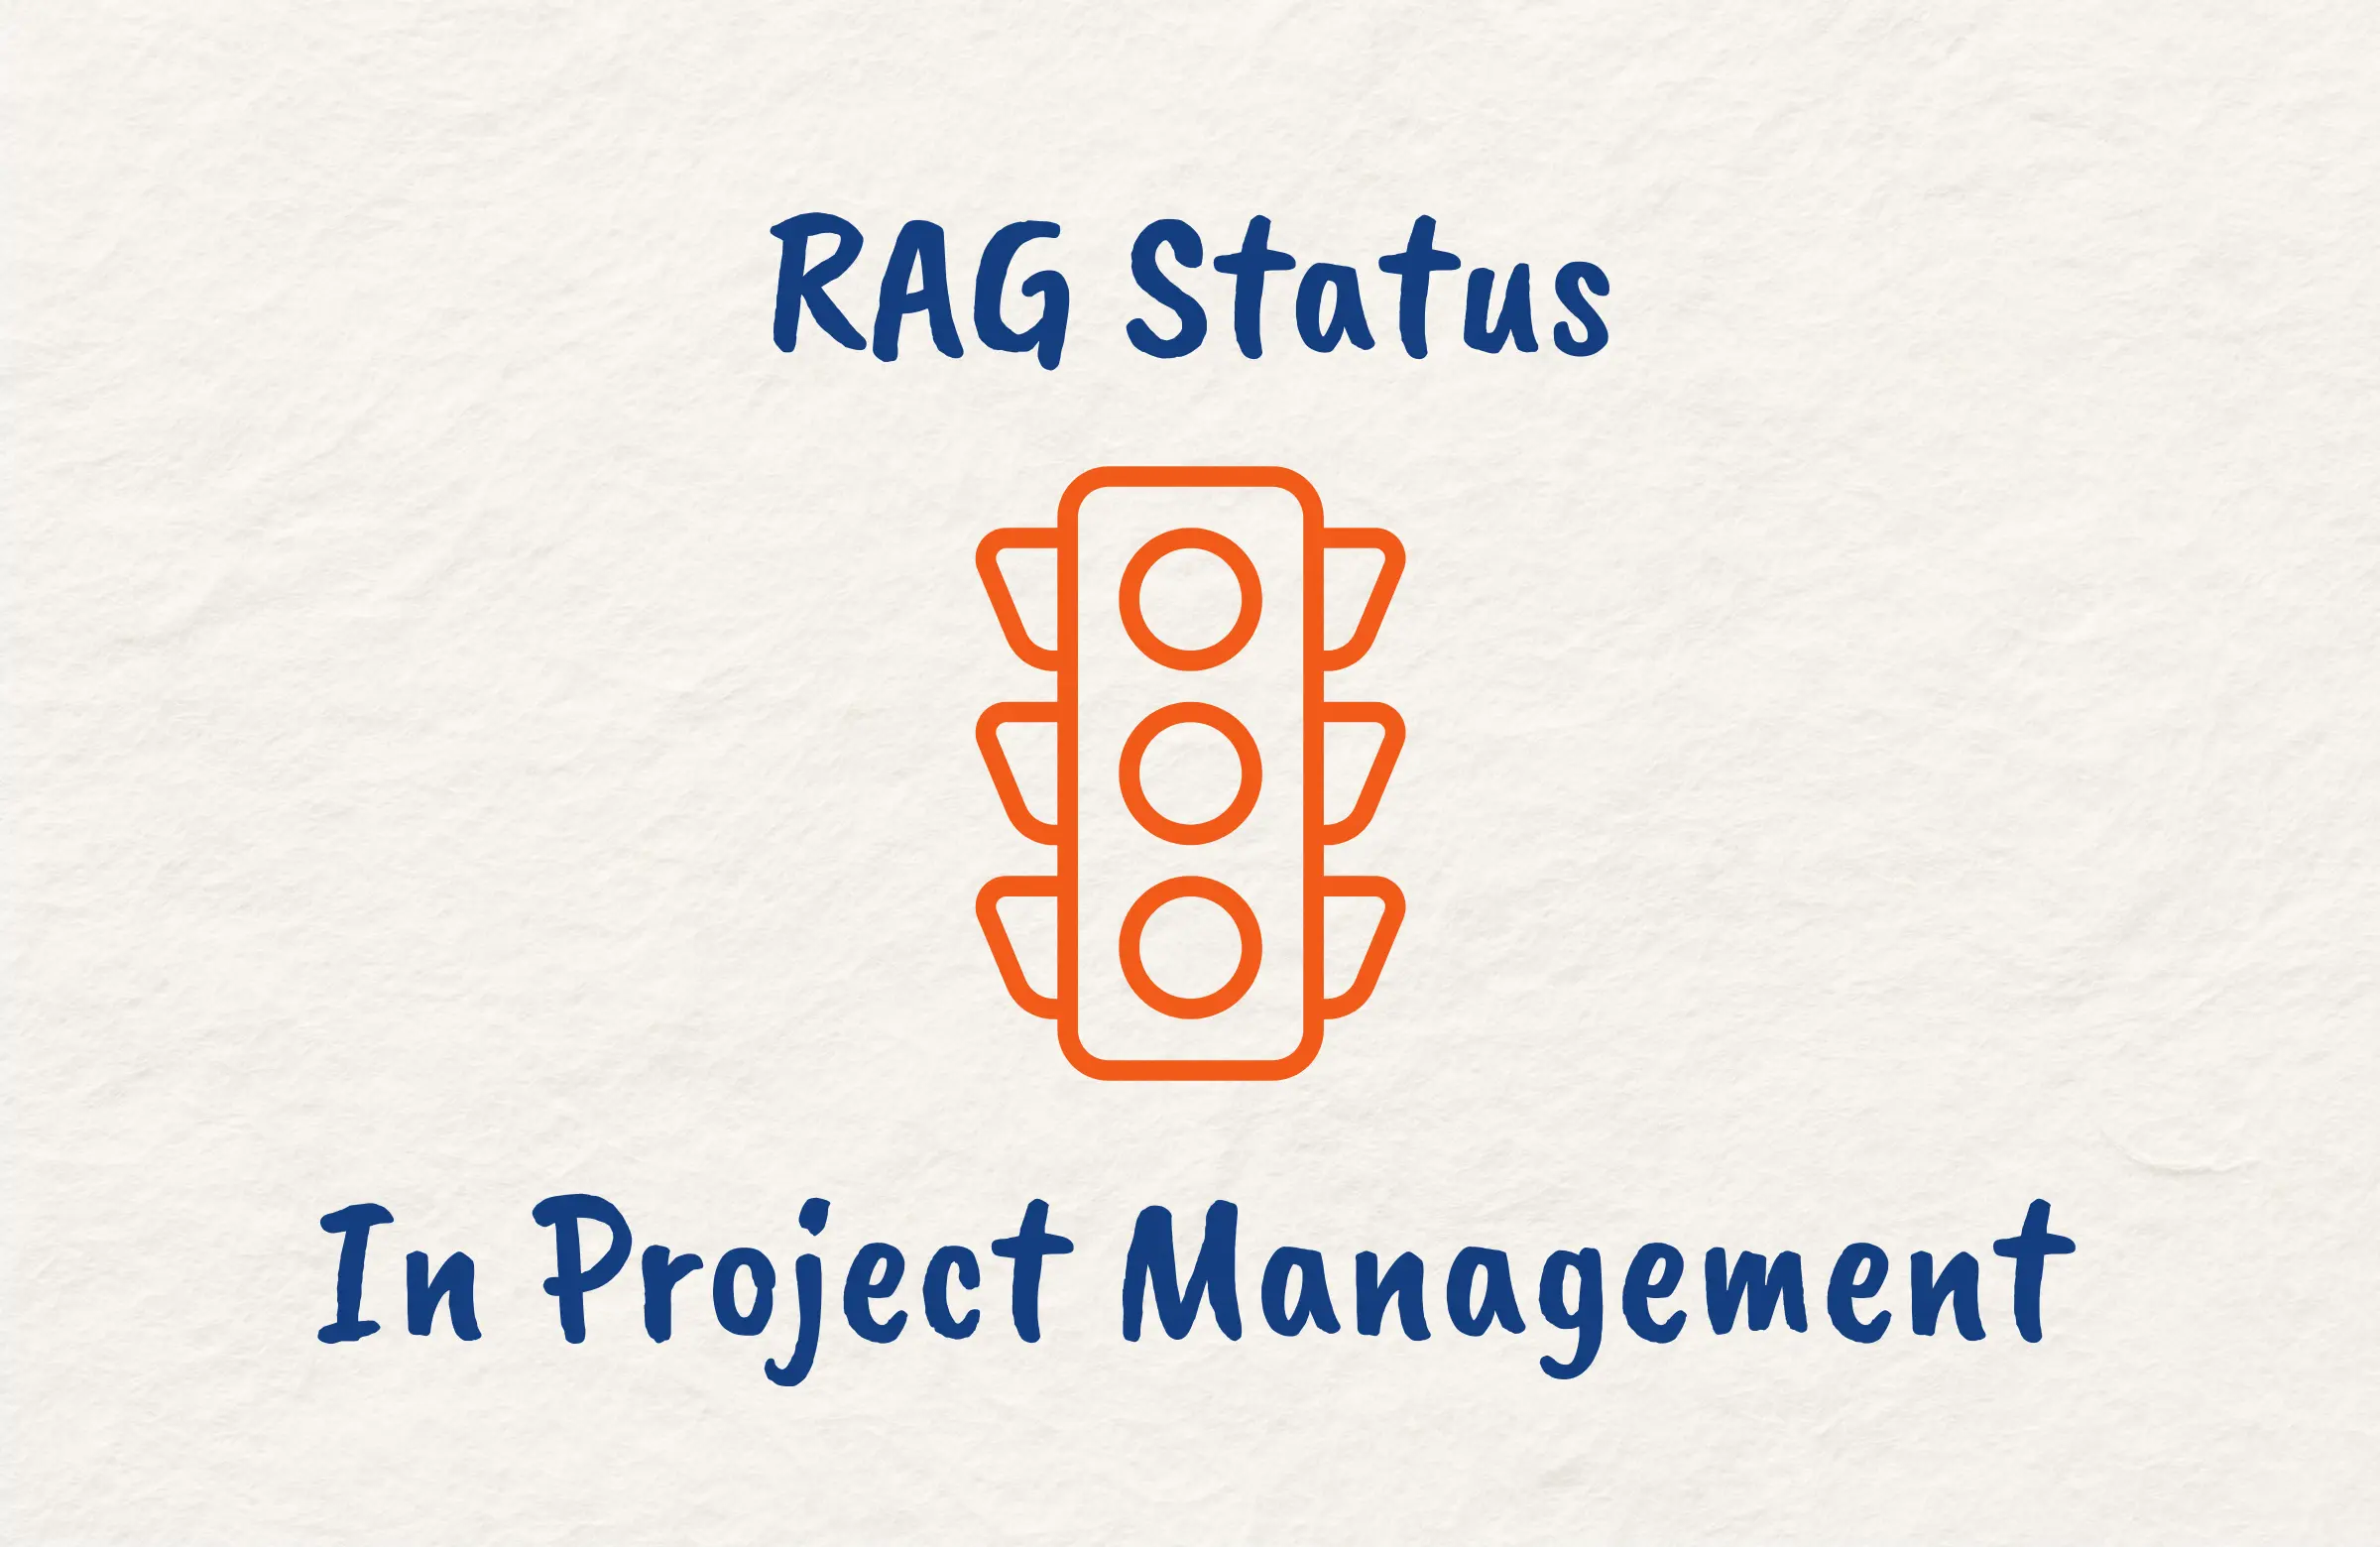 What is RAG Status In Project Management